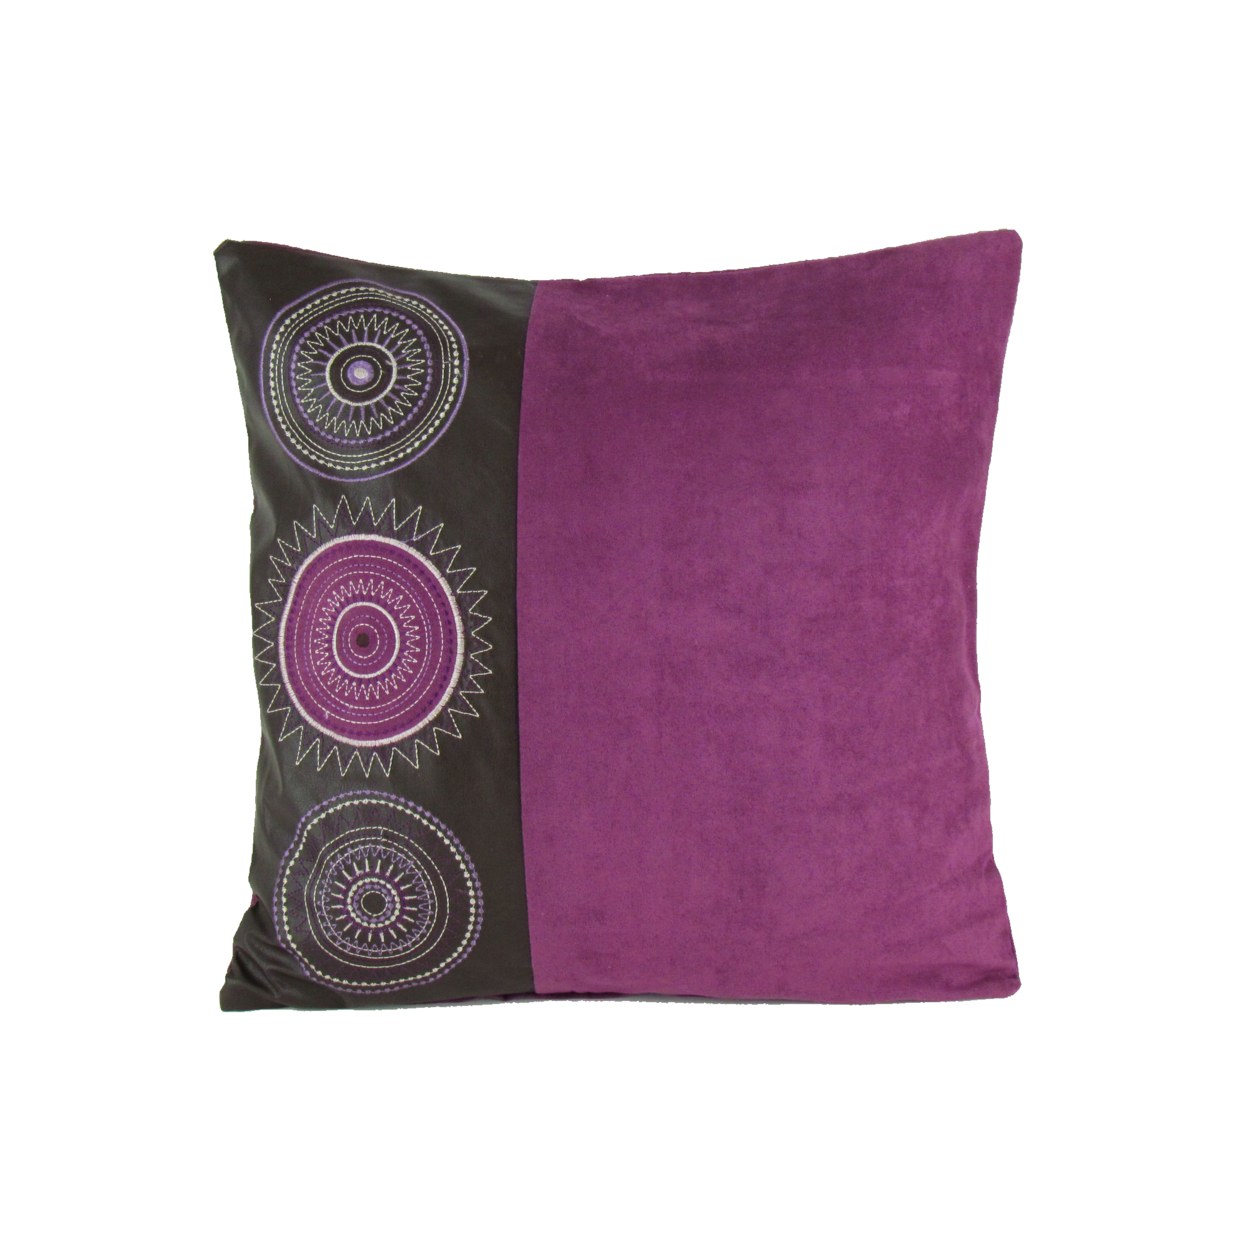 Leatherette And Fabric Accent Pillow, Purple And Brown- Saltoro Sherpi